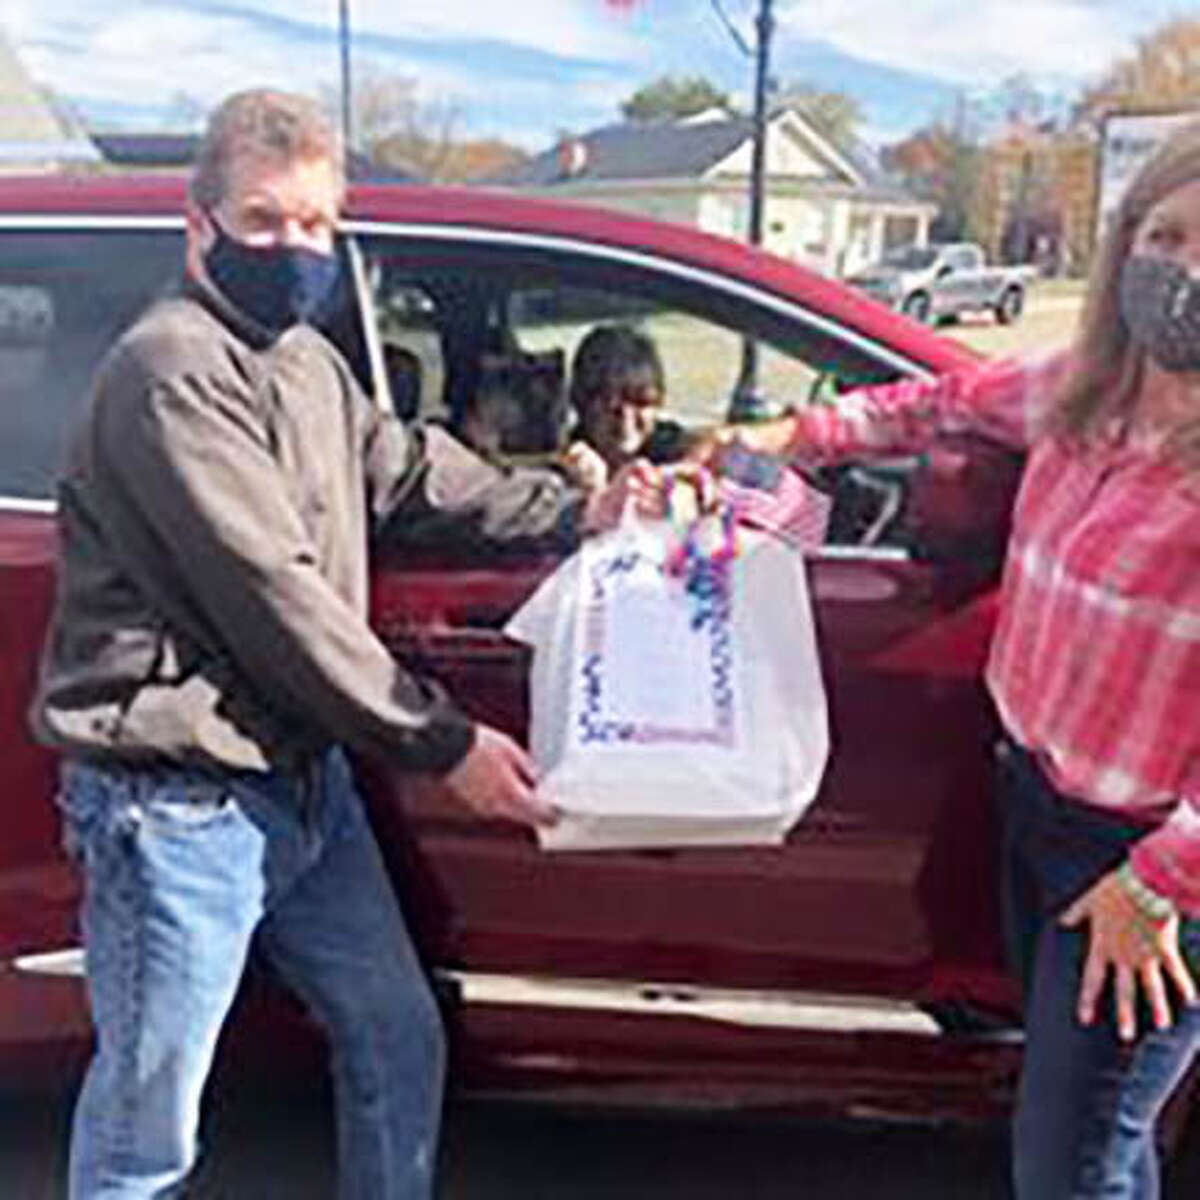 A volunteer from Main Street Community Center hands a meal to a family member of a veteran during curbside pickup at a previous Veterans Luncheon at MSCC. This year’s lunch is Nov. 2 and on-site dining is sold out, but reservations are still available for delivery and curbside pickup.